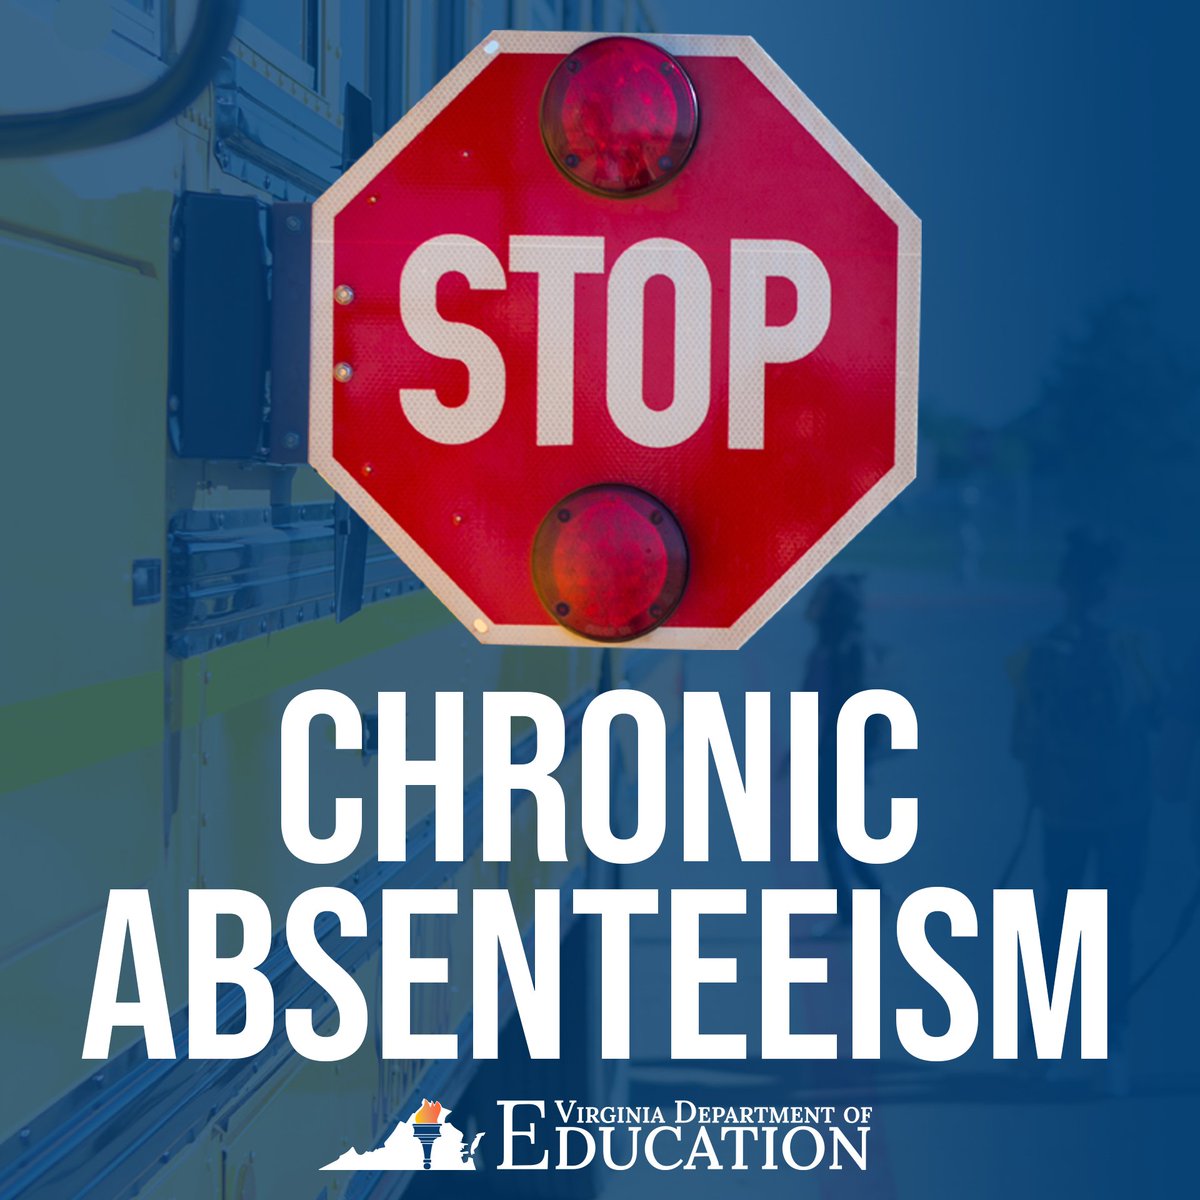 Chronic absenteeism has negative effects on a student's education. Let's all do our part to make sure our students attend class and get the education they deserve. #AttendanceMattersVA #ALLIn